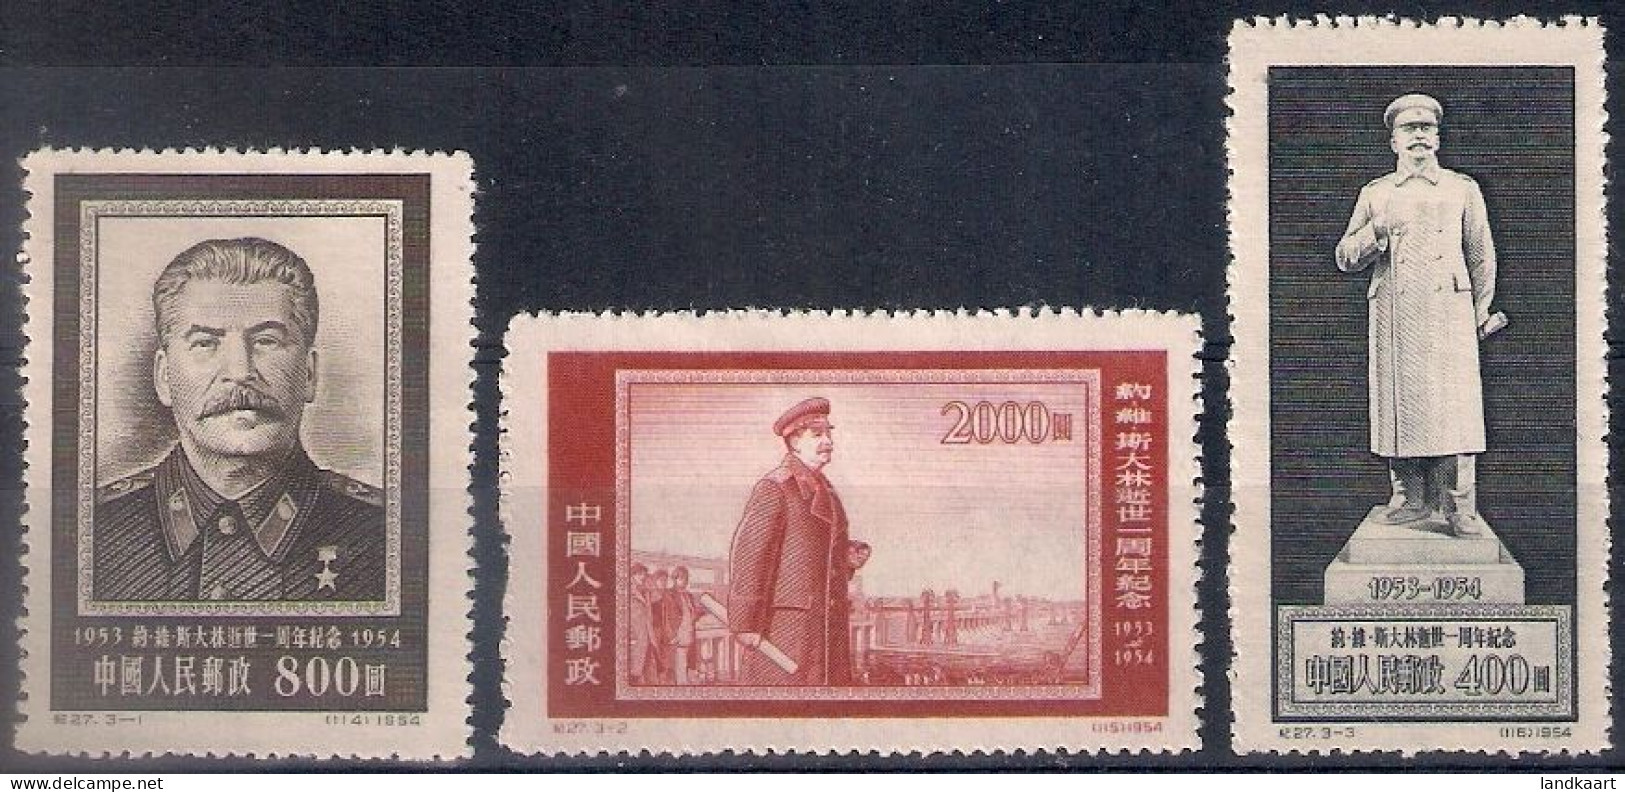 China 1954, Michel Nr 255-57, MNH - Unused Stamps